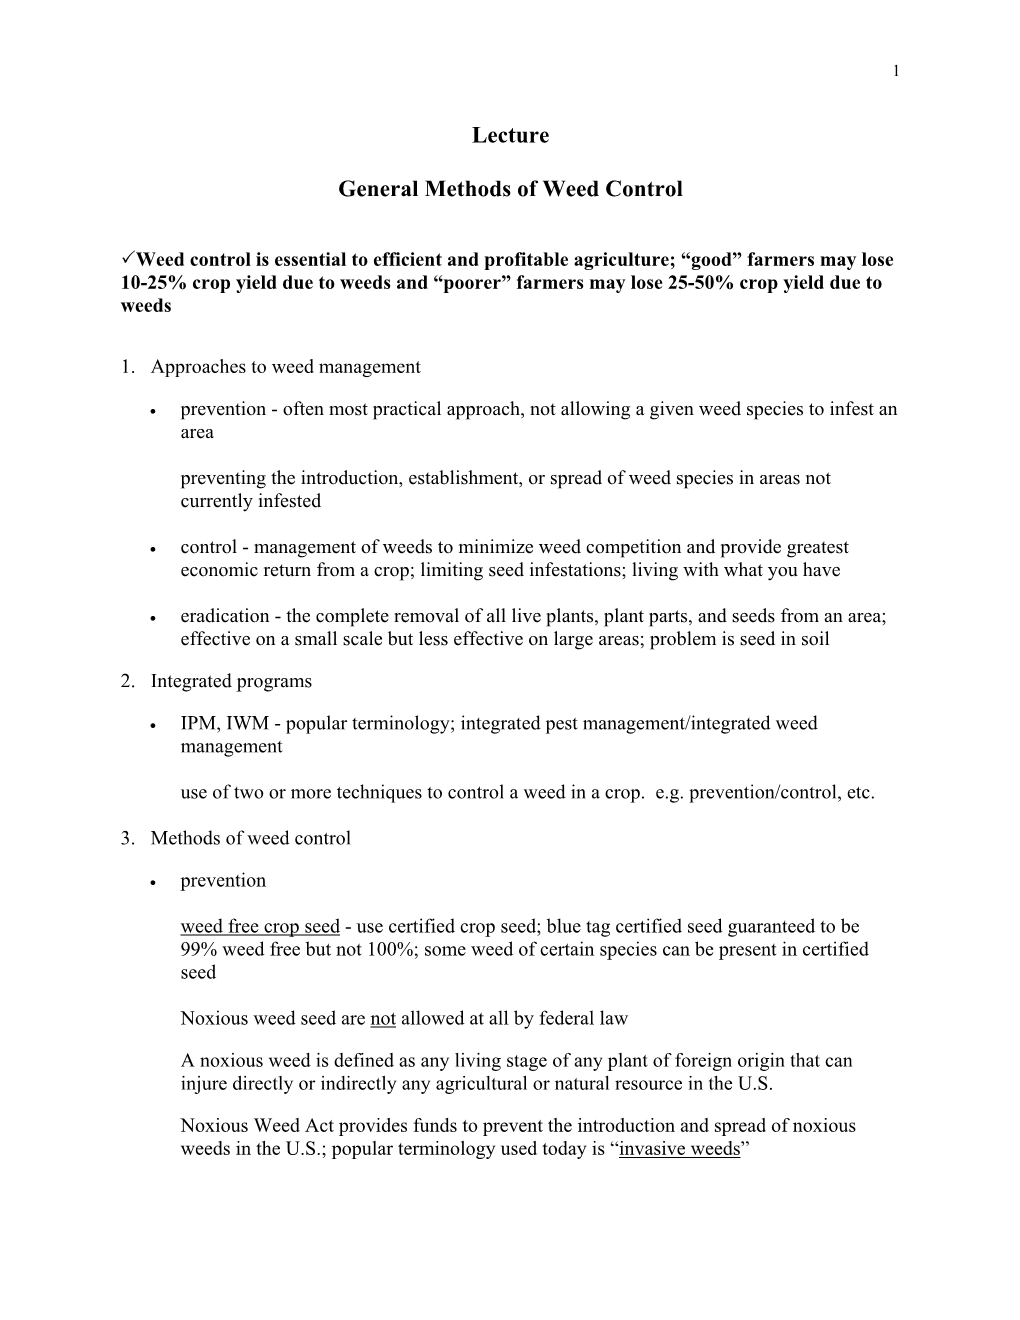 Lecture General Methods of Weed Control